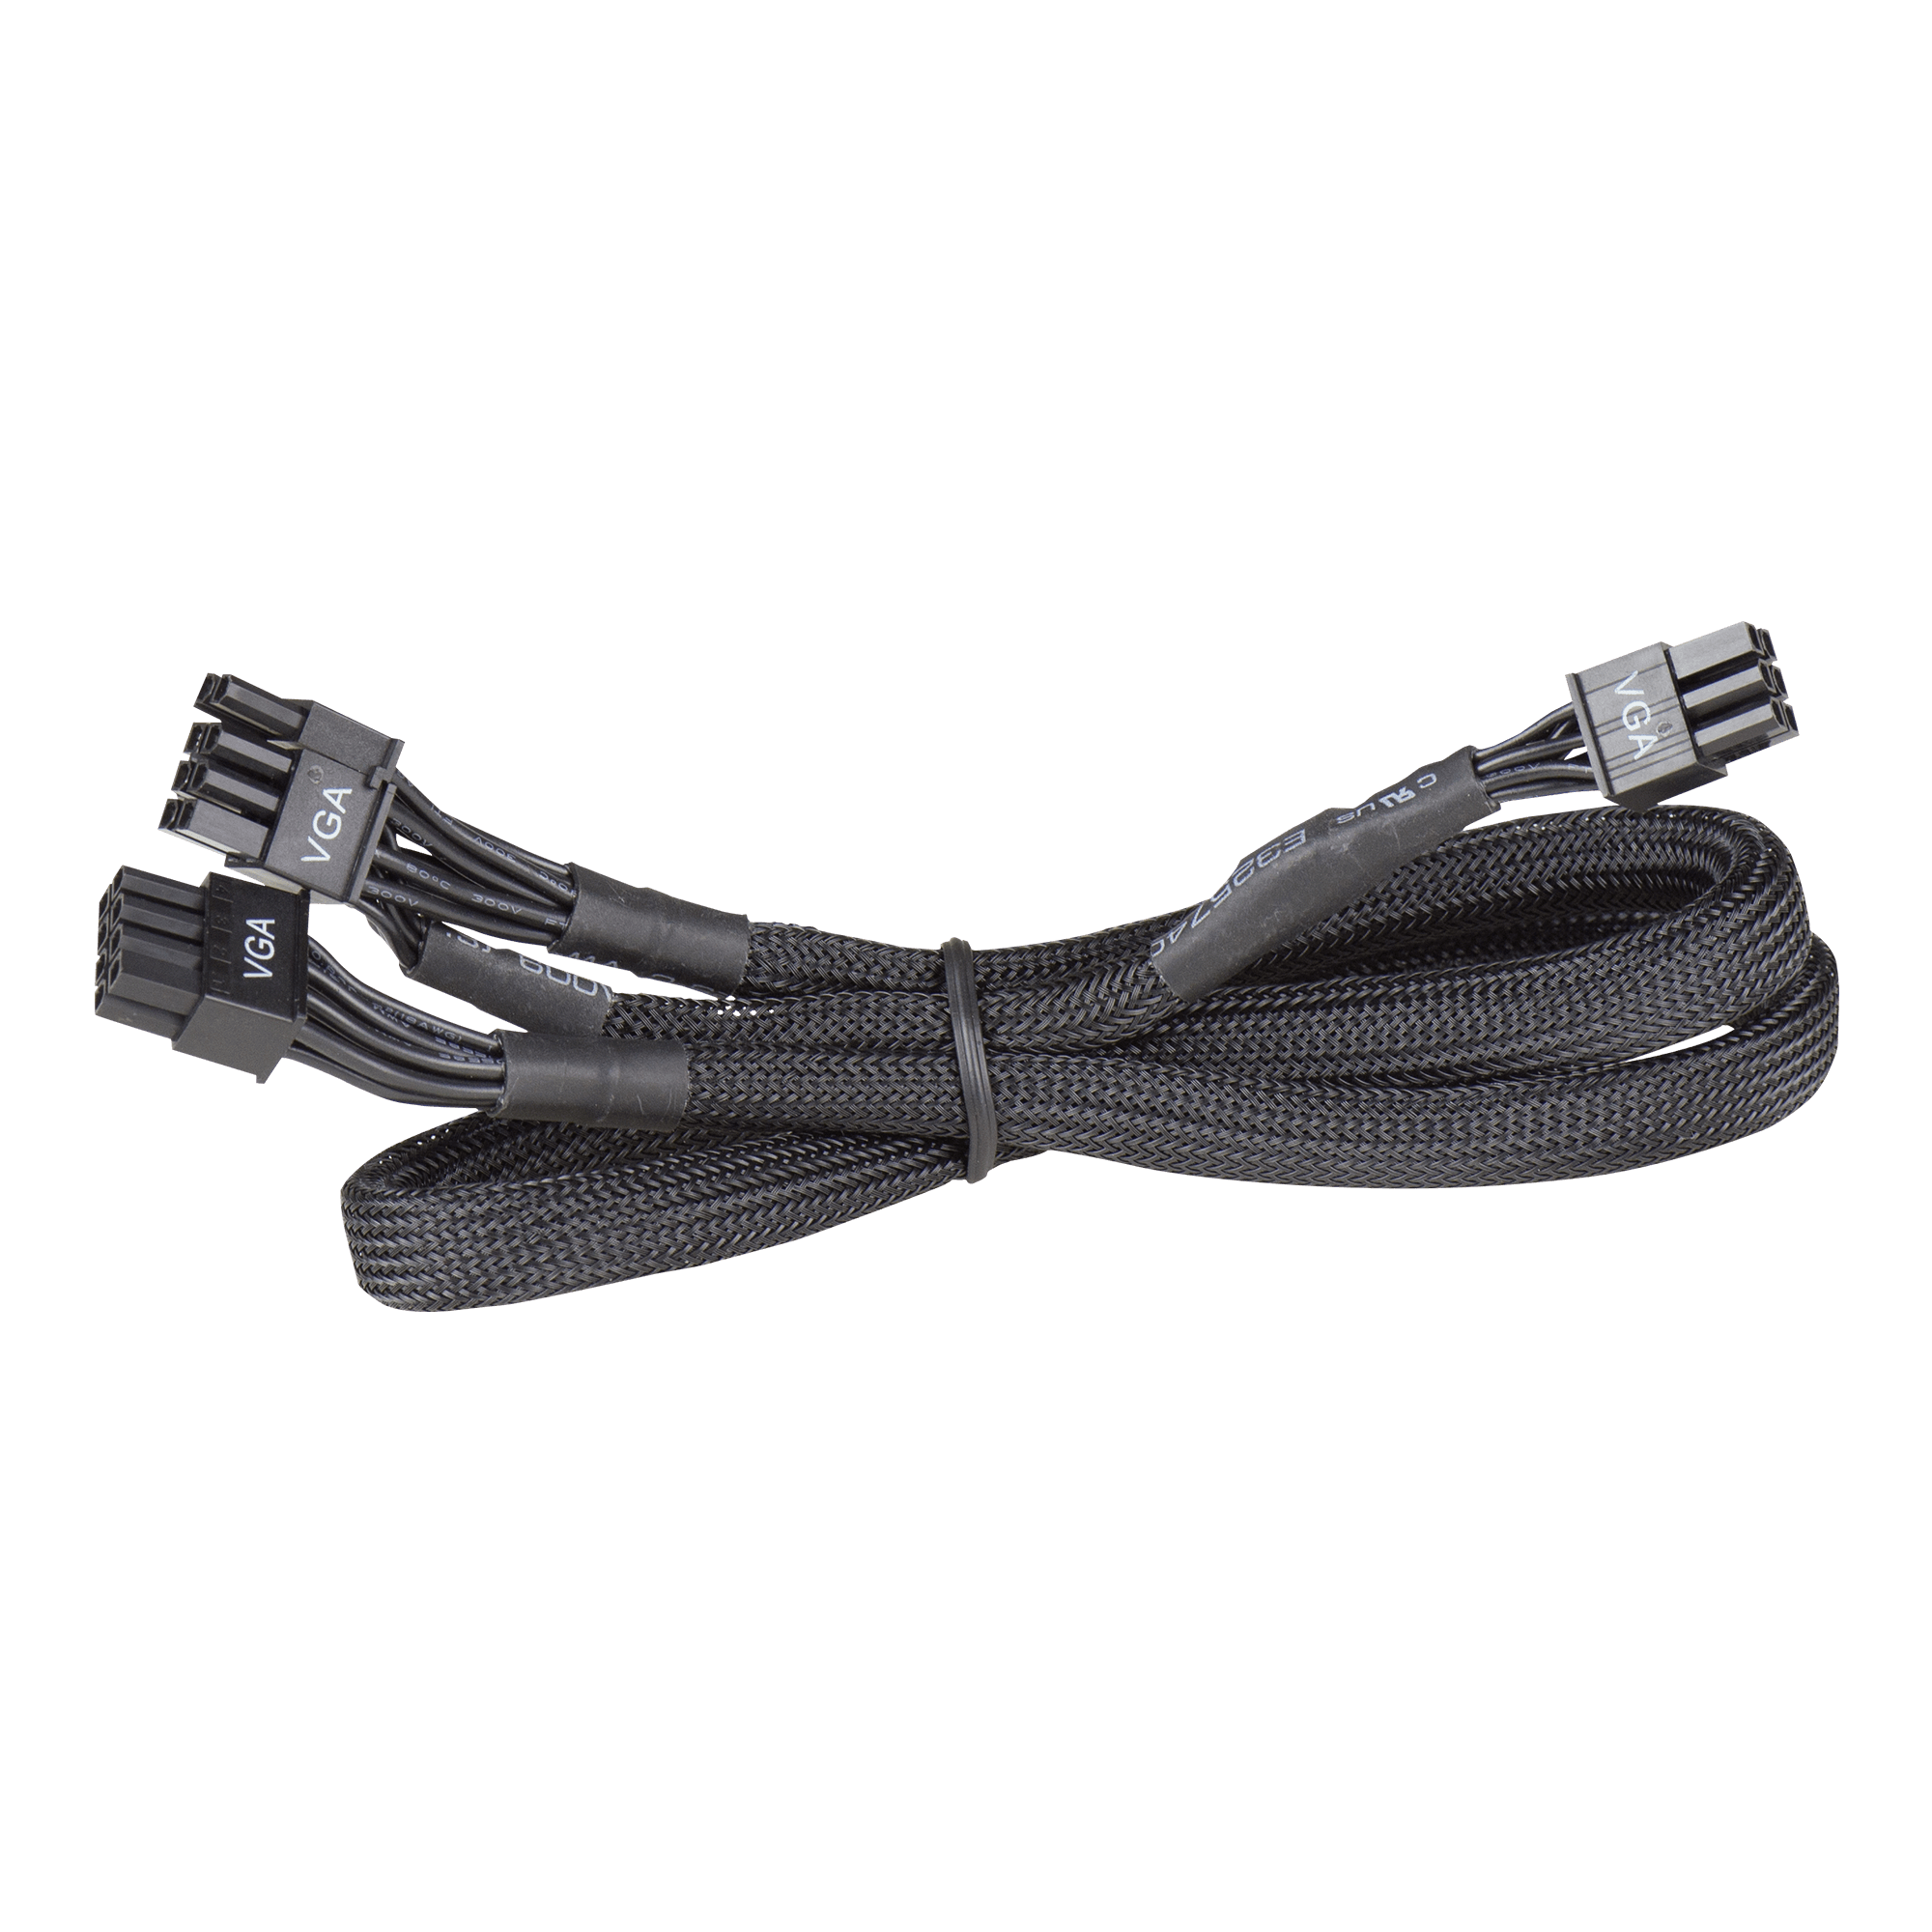 Evga Products Evga Pcie 8pin 6 2 6pin Cable Single W001 00 000054